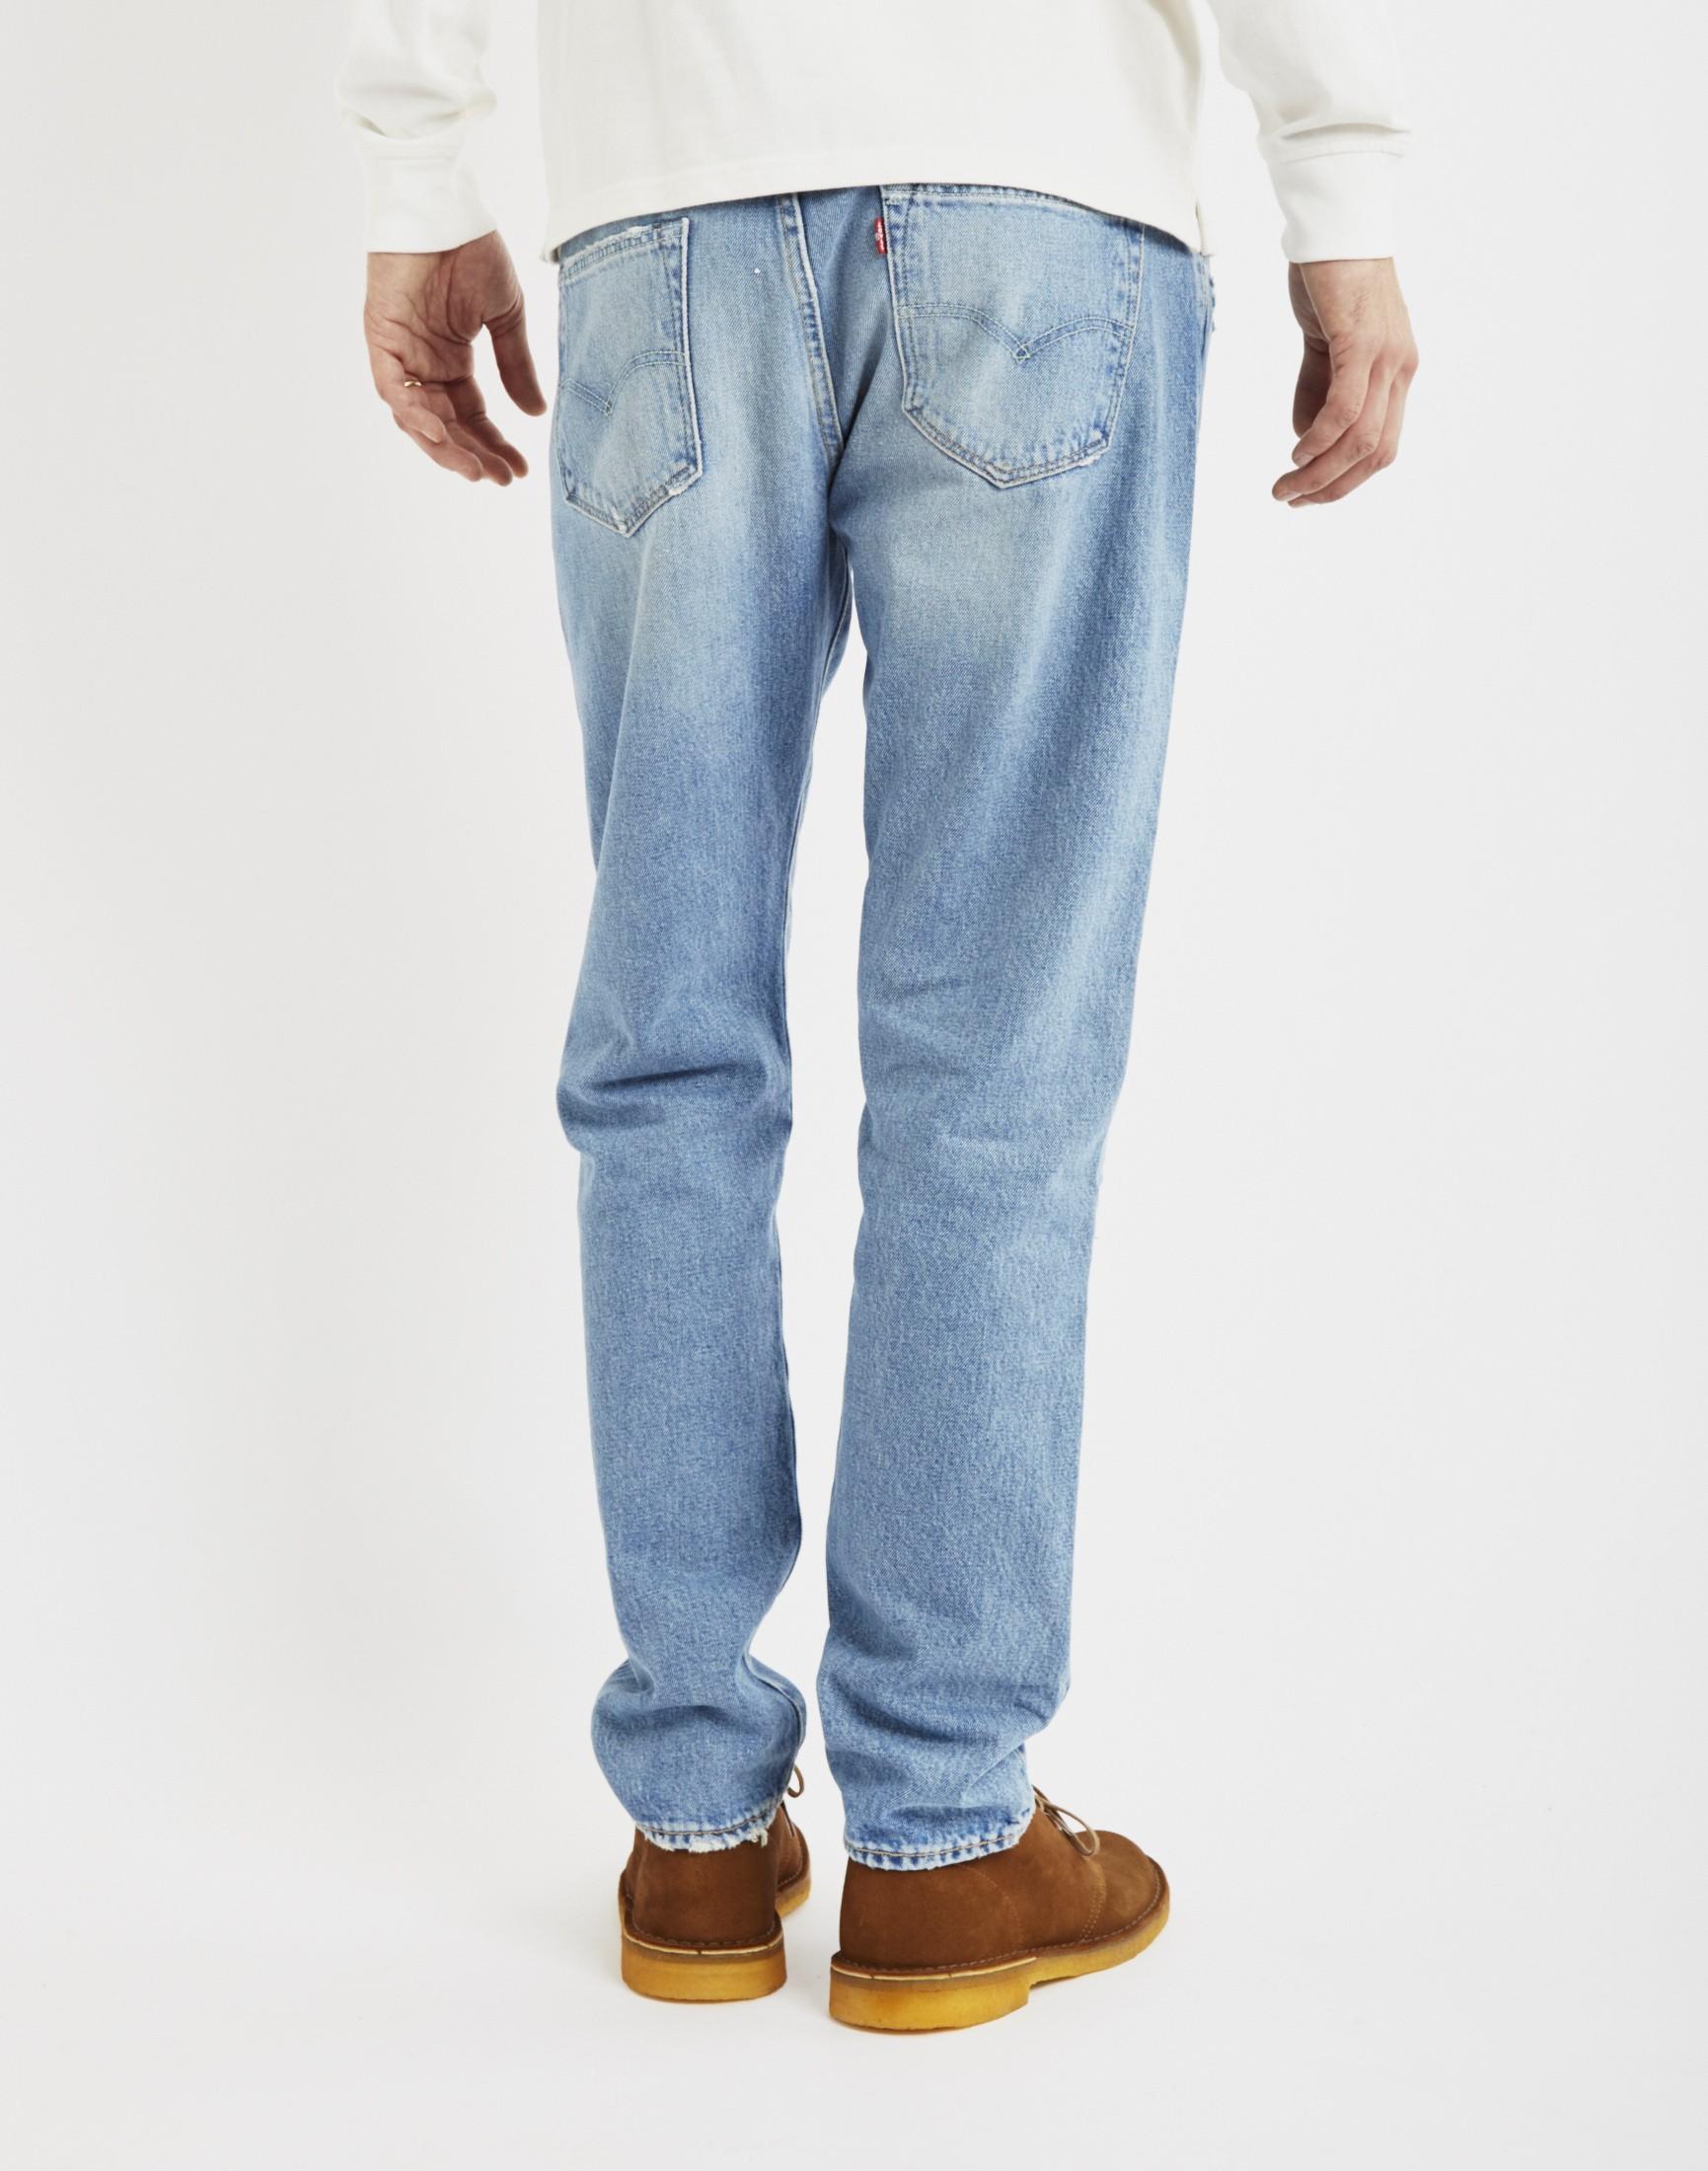 Lyst - Levi'S 501 Customized And Tapered Old Spitalfields Jean in Brown ...